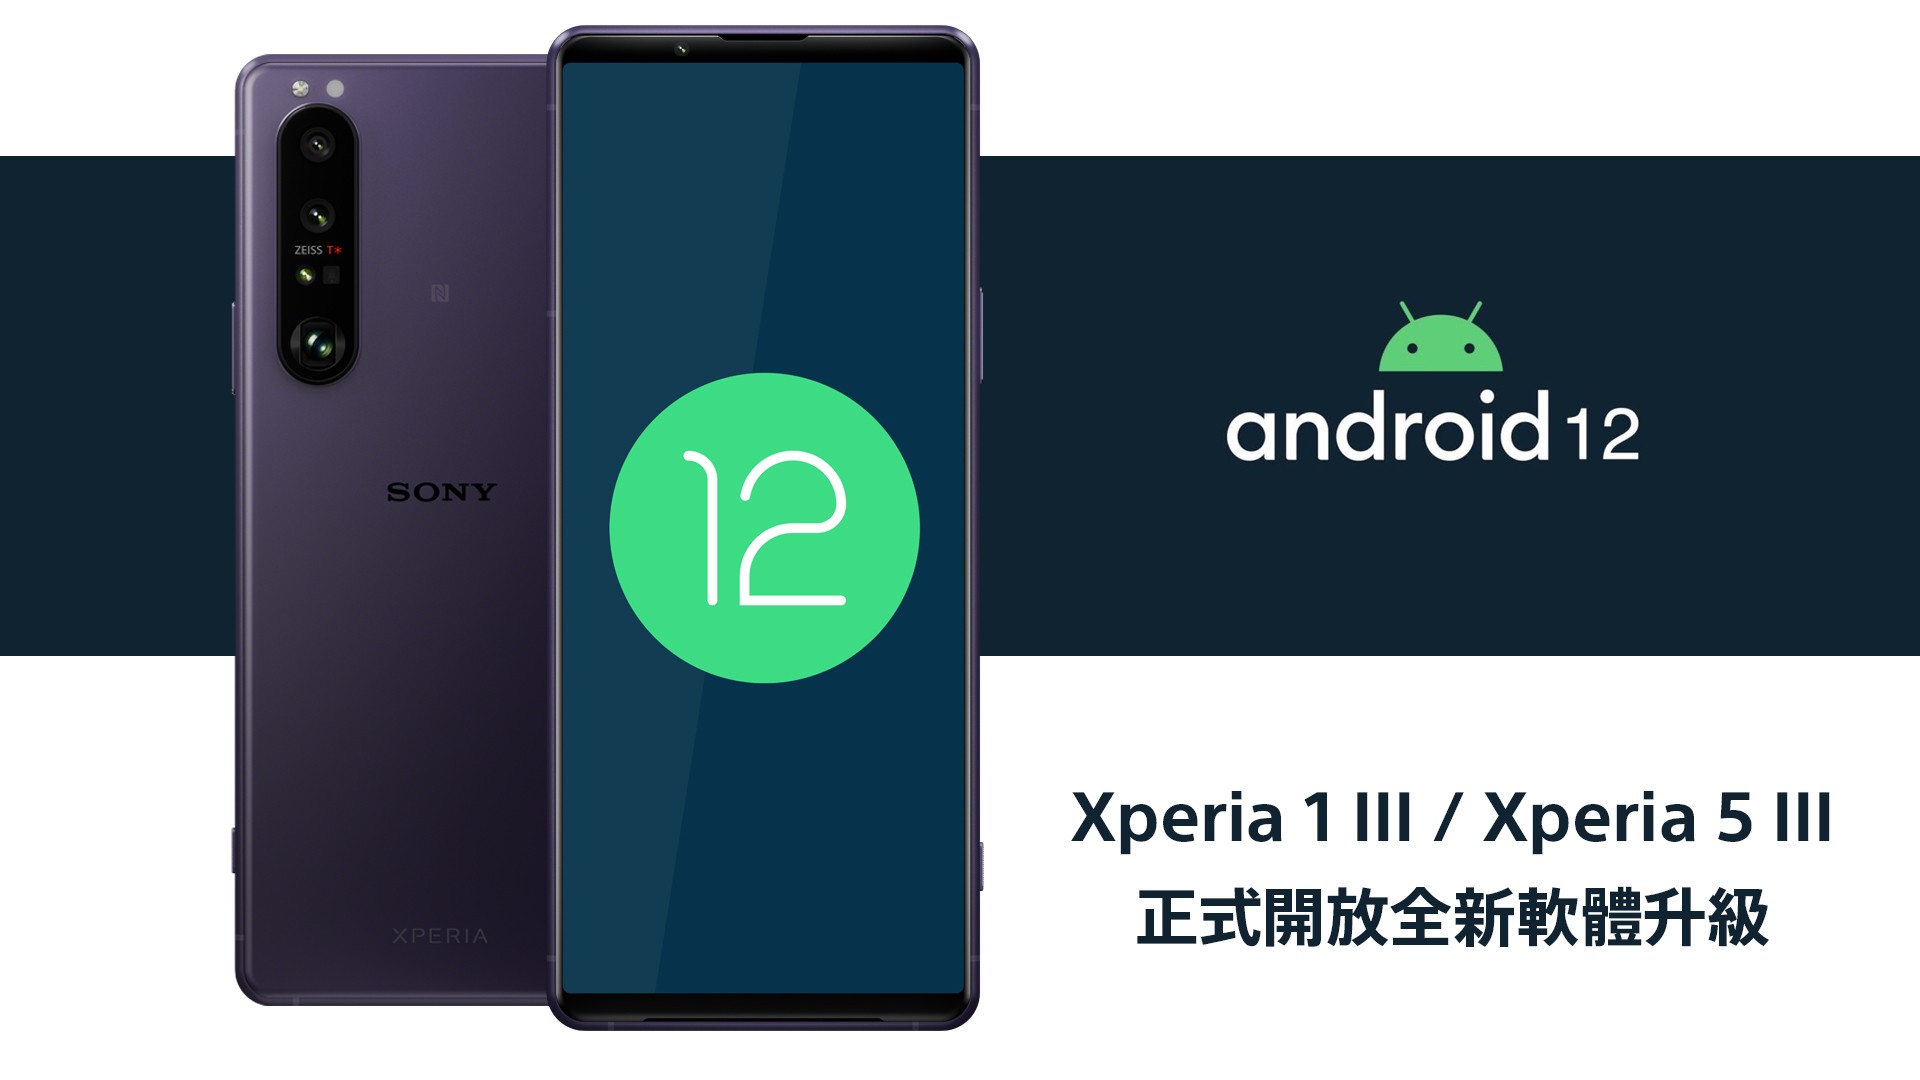 Sony Mobile 开放全新软件升级支援 Android 12 首波推送 Xperia 1 III、5 III 软件更新